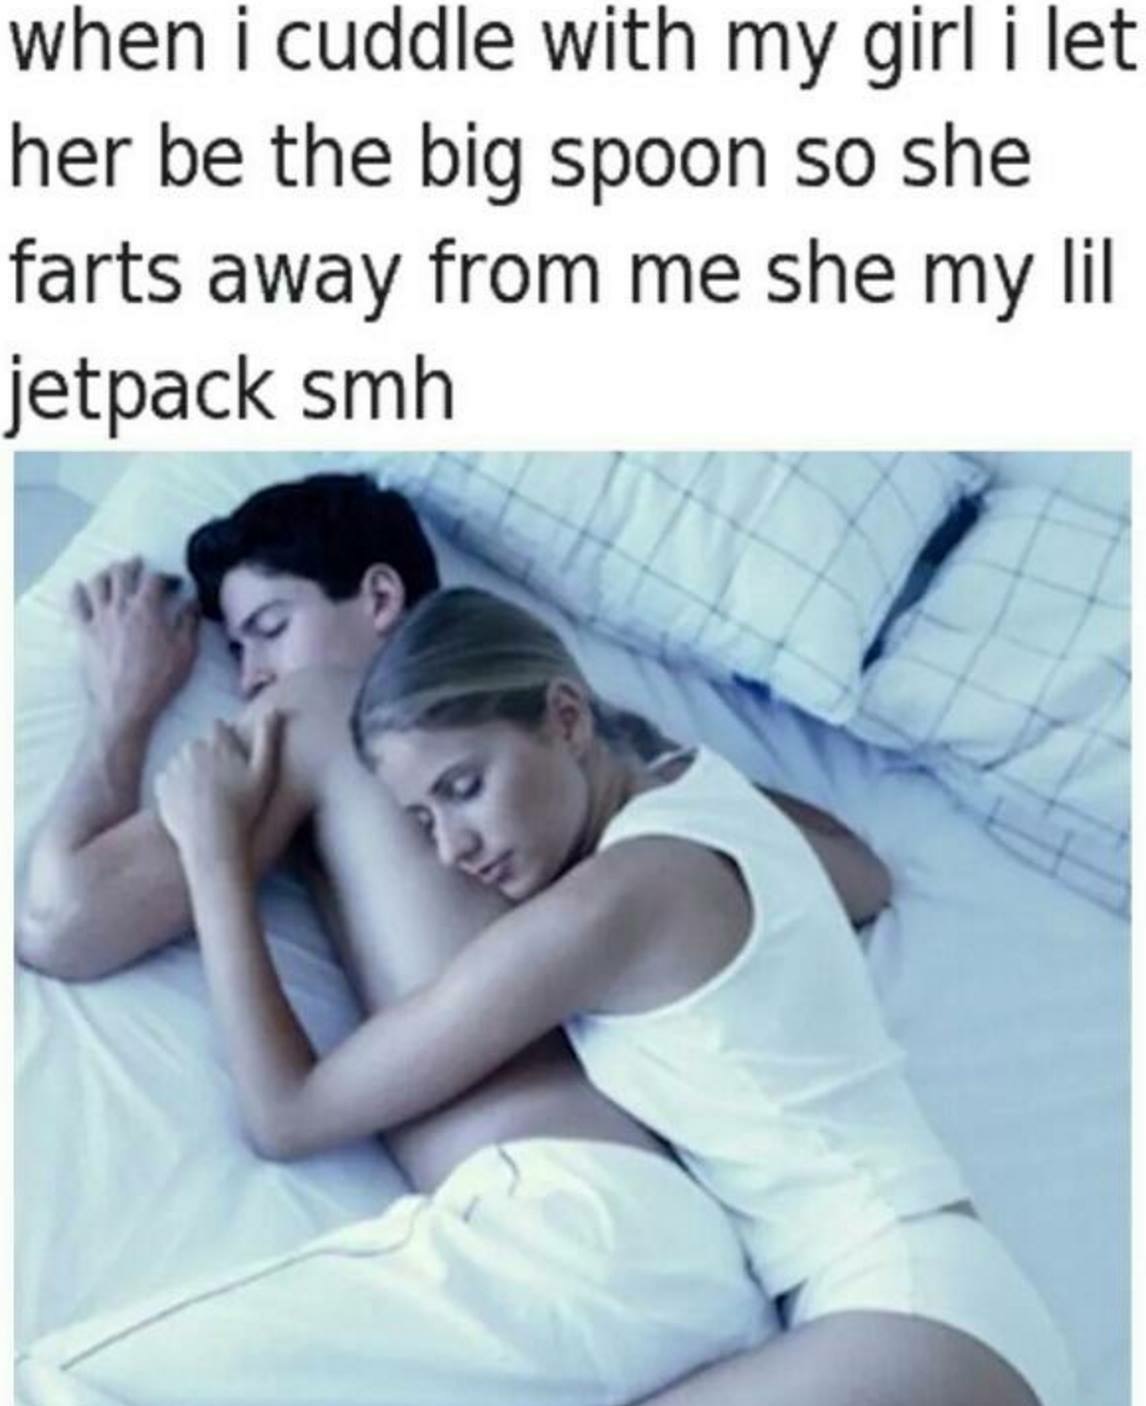 my lil jetpack meme - when i cuddle with my girl i let her be the big spoon so she farts away from me she my lil jetpack smh